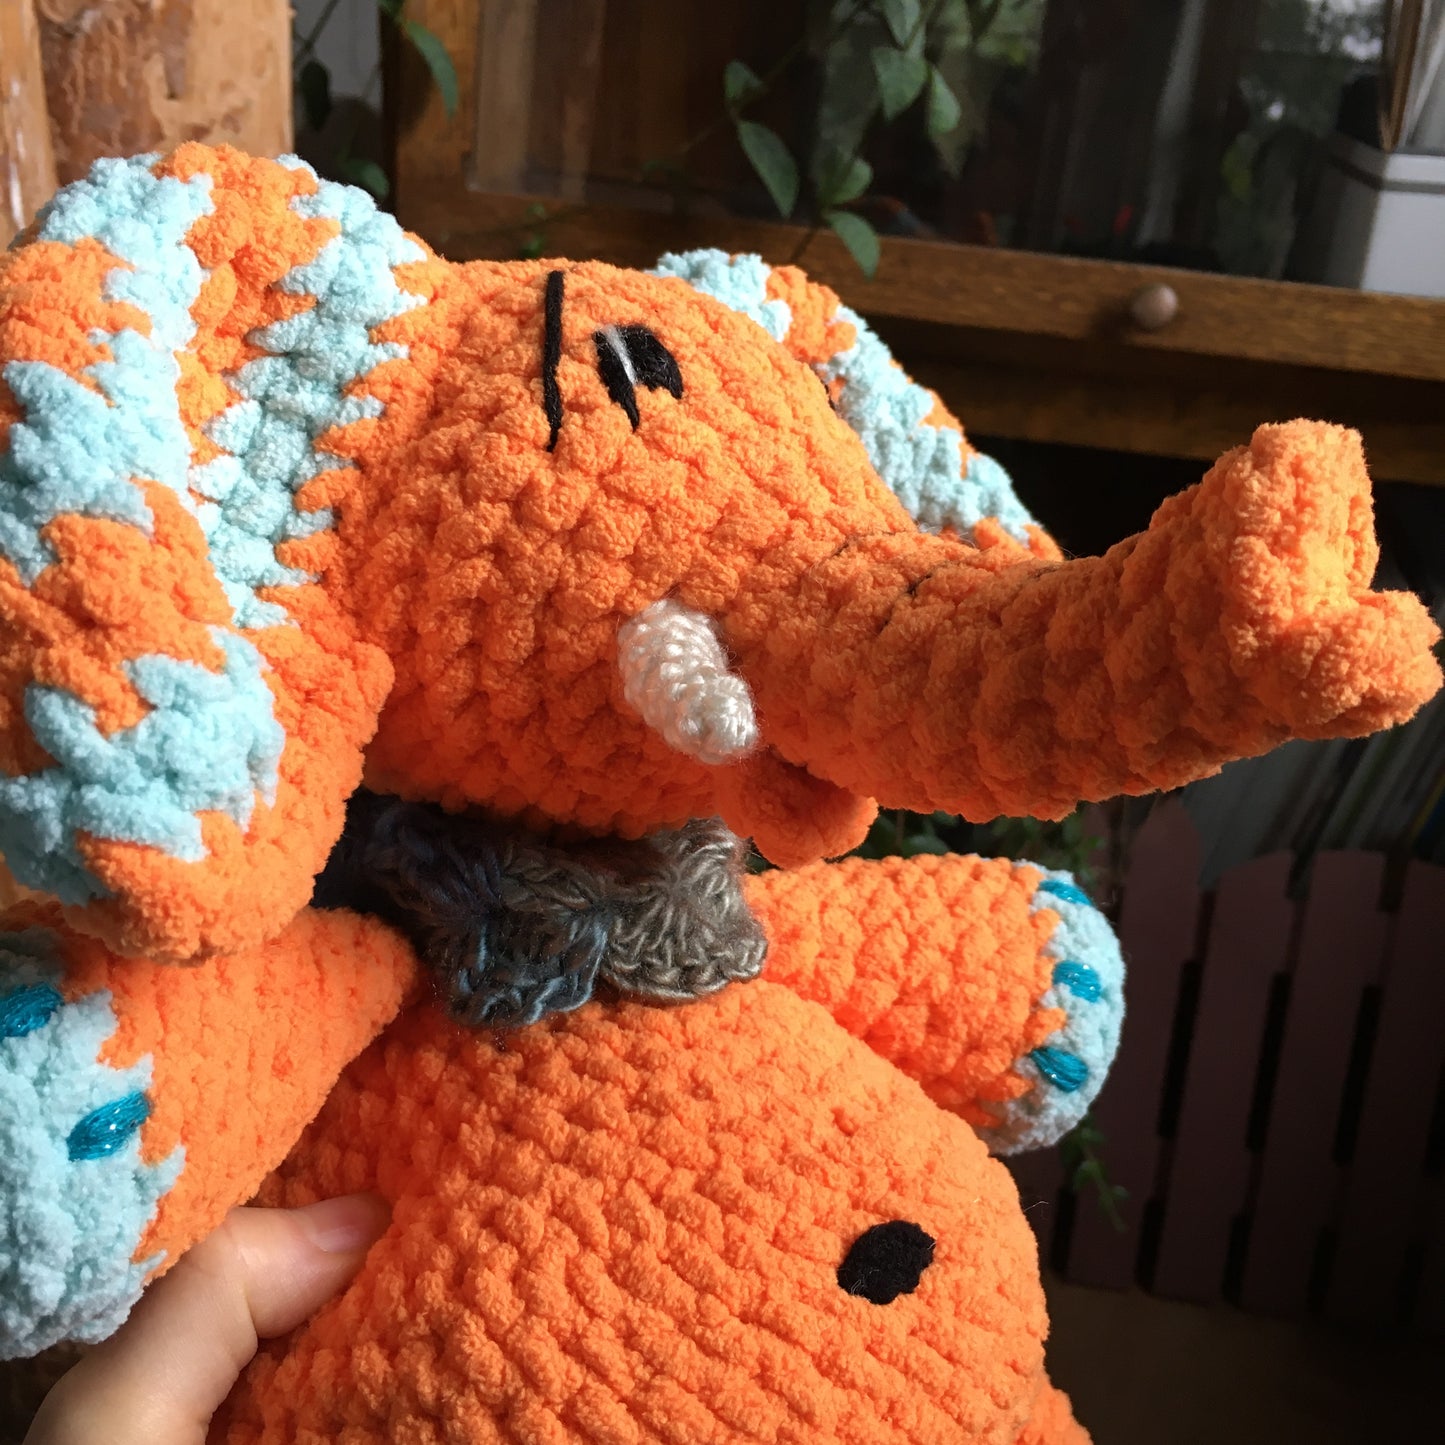 Orangina The elephant with Big Belly, Orange and Aqua, can be personalized in doggies